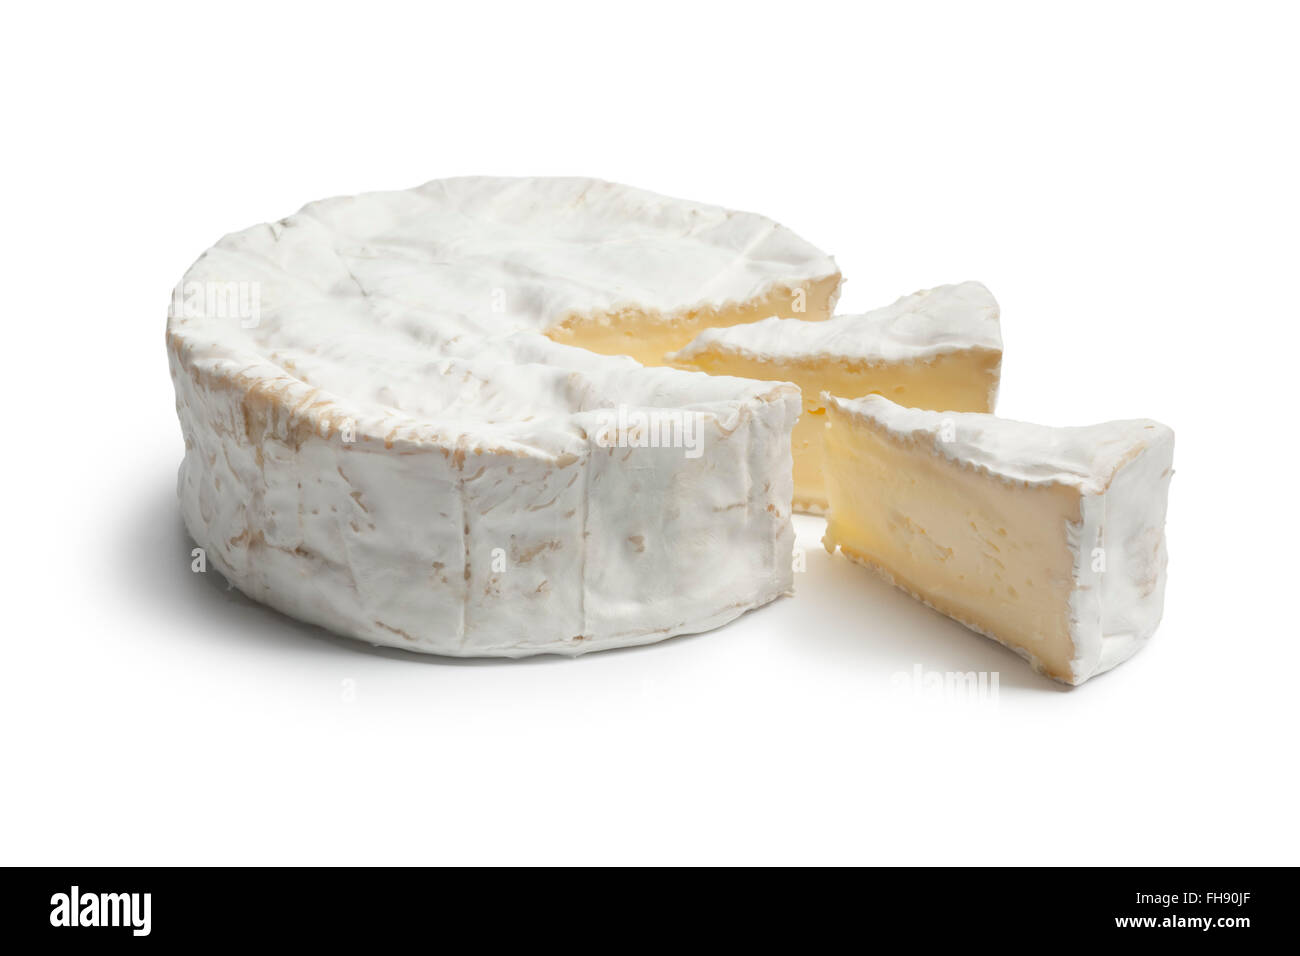 Whole Camembert cheese and pieces on white background Stock Photo